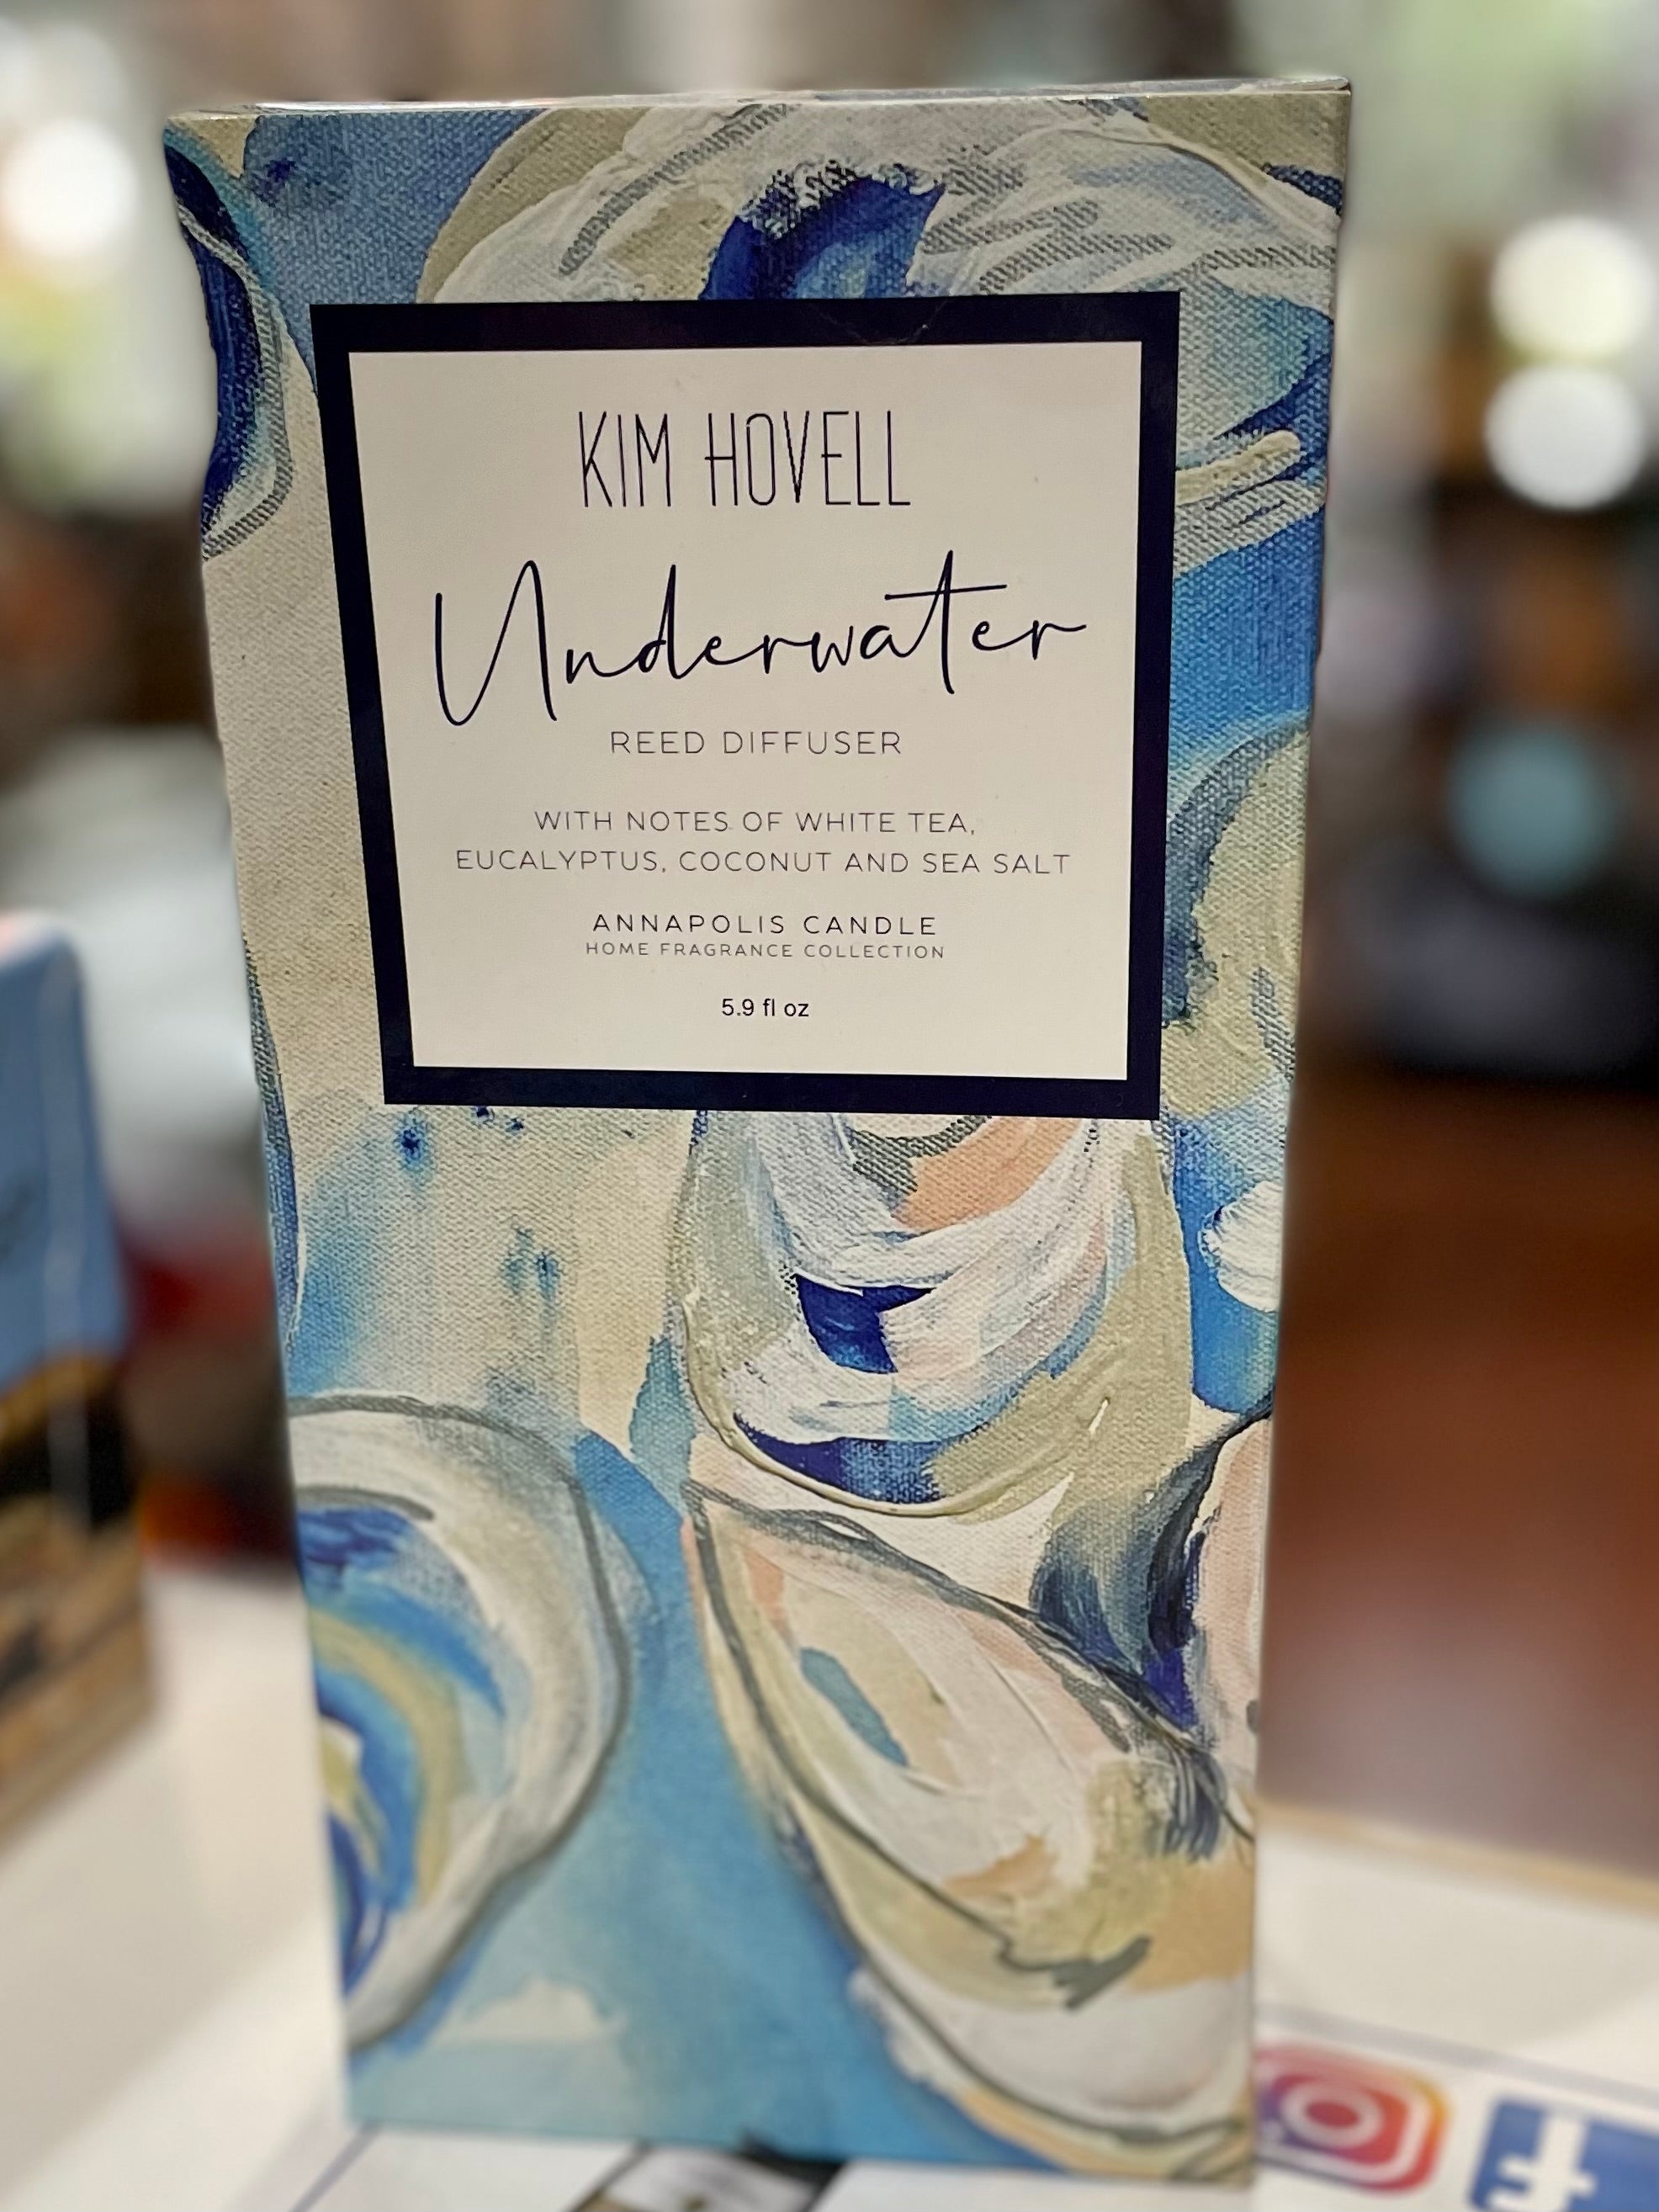 Annapolis Candle KIM HOVELL Underwater Reed Diffuser